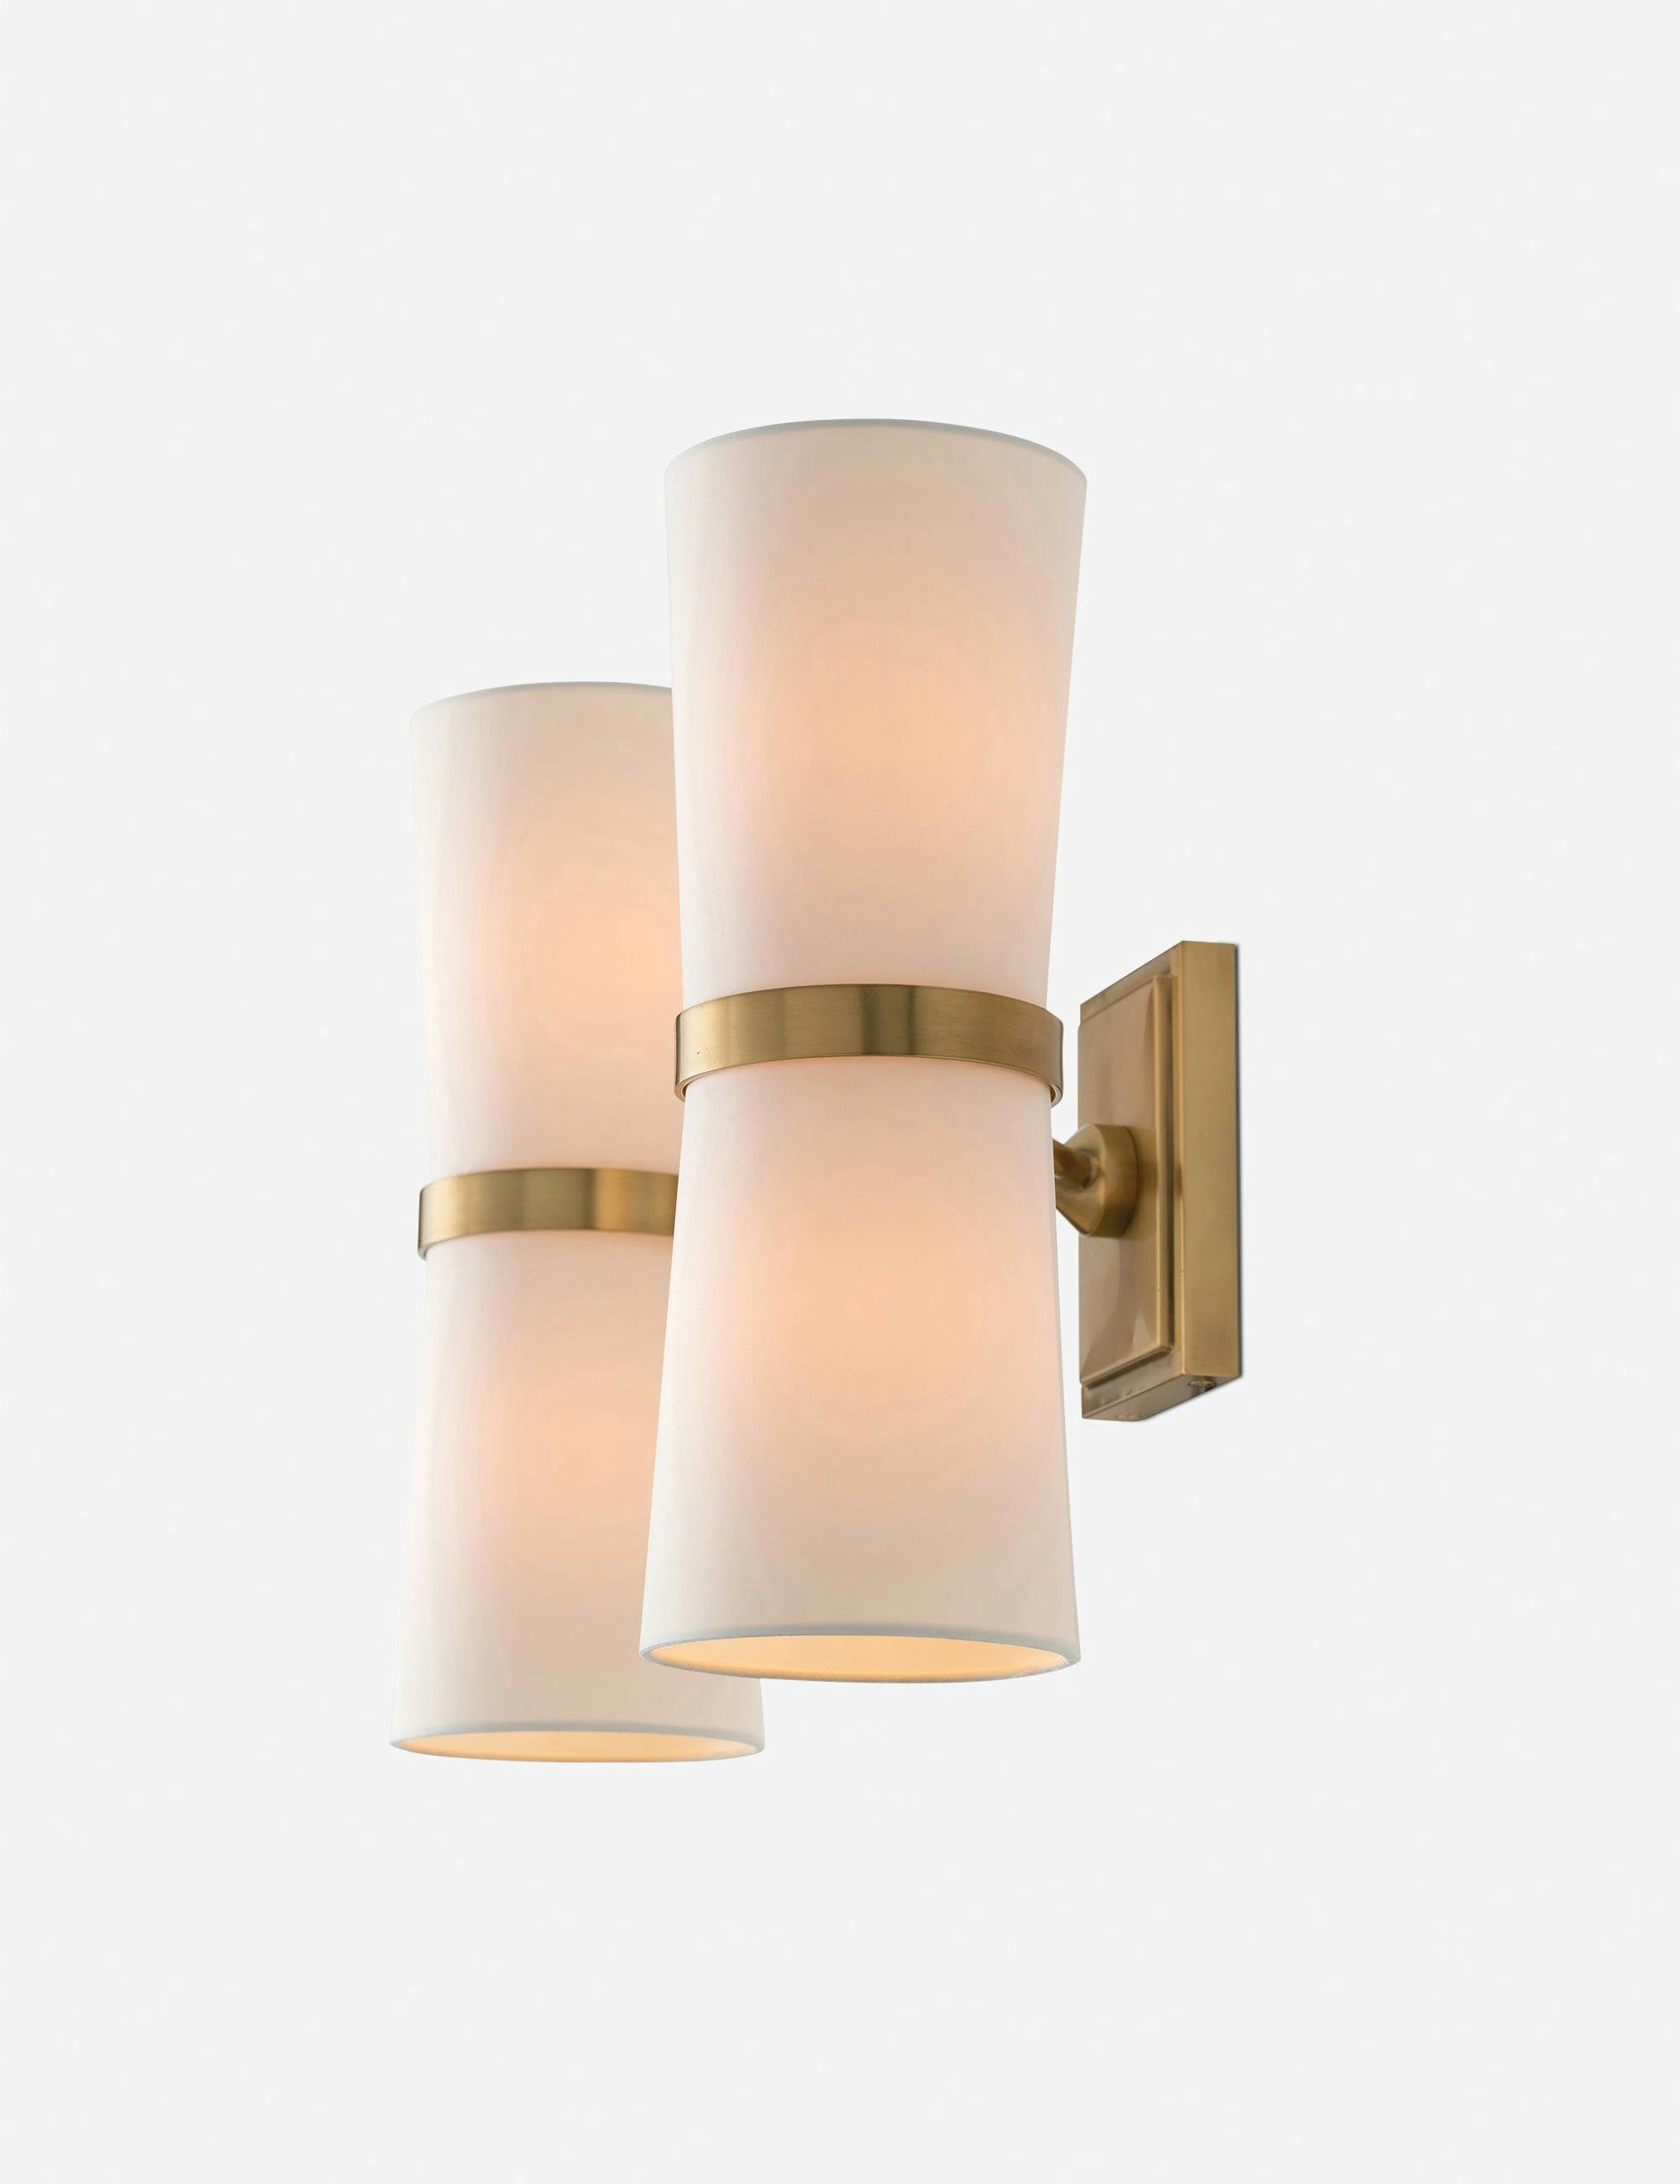 Inwood Antique Brass 15" Wall Sconce with Off-White Linen Shades